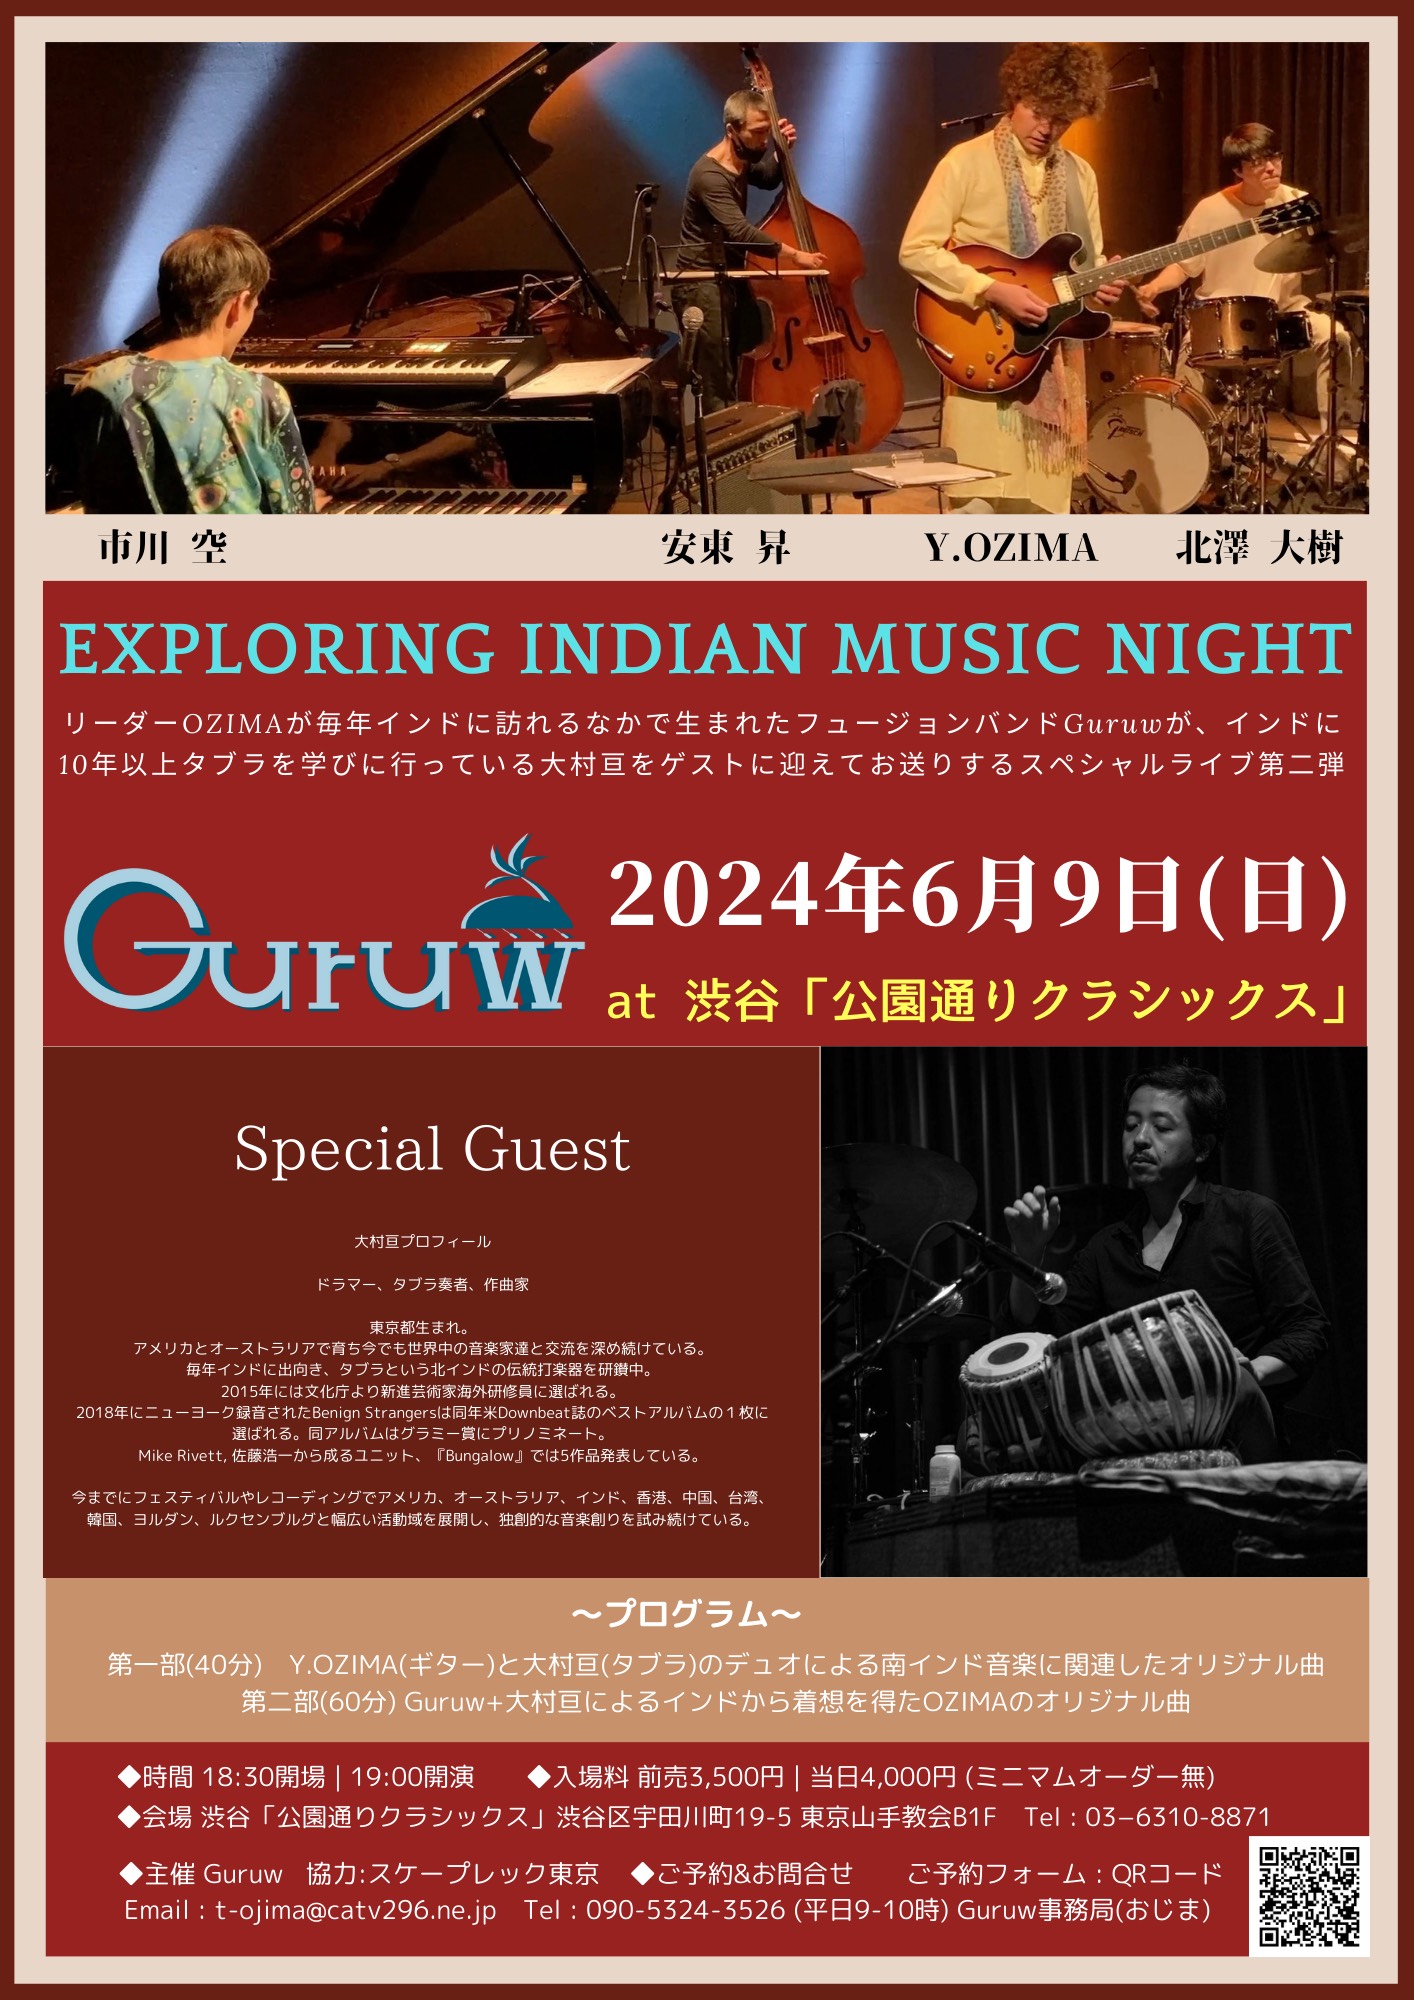 Guruw【Exploring Indian Music Night】special guest大村 亘